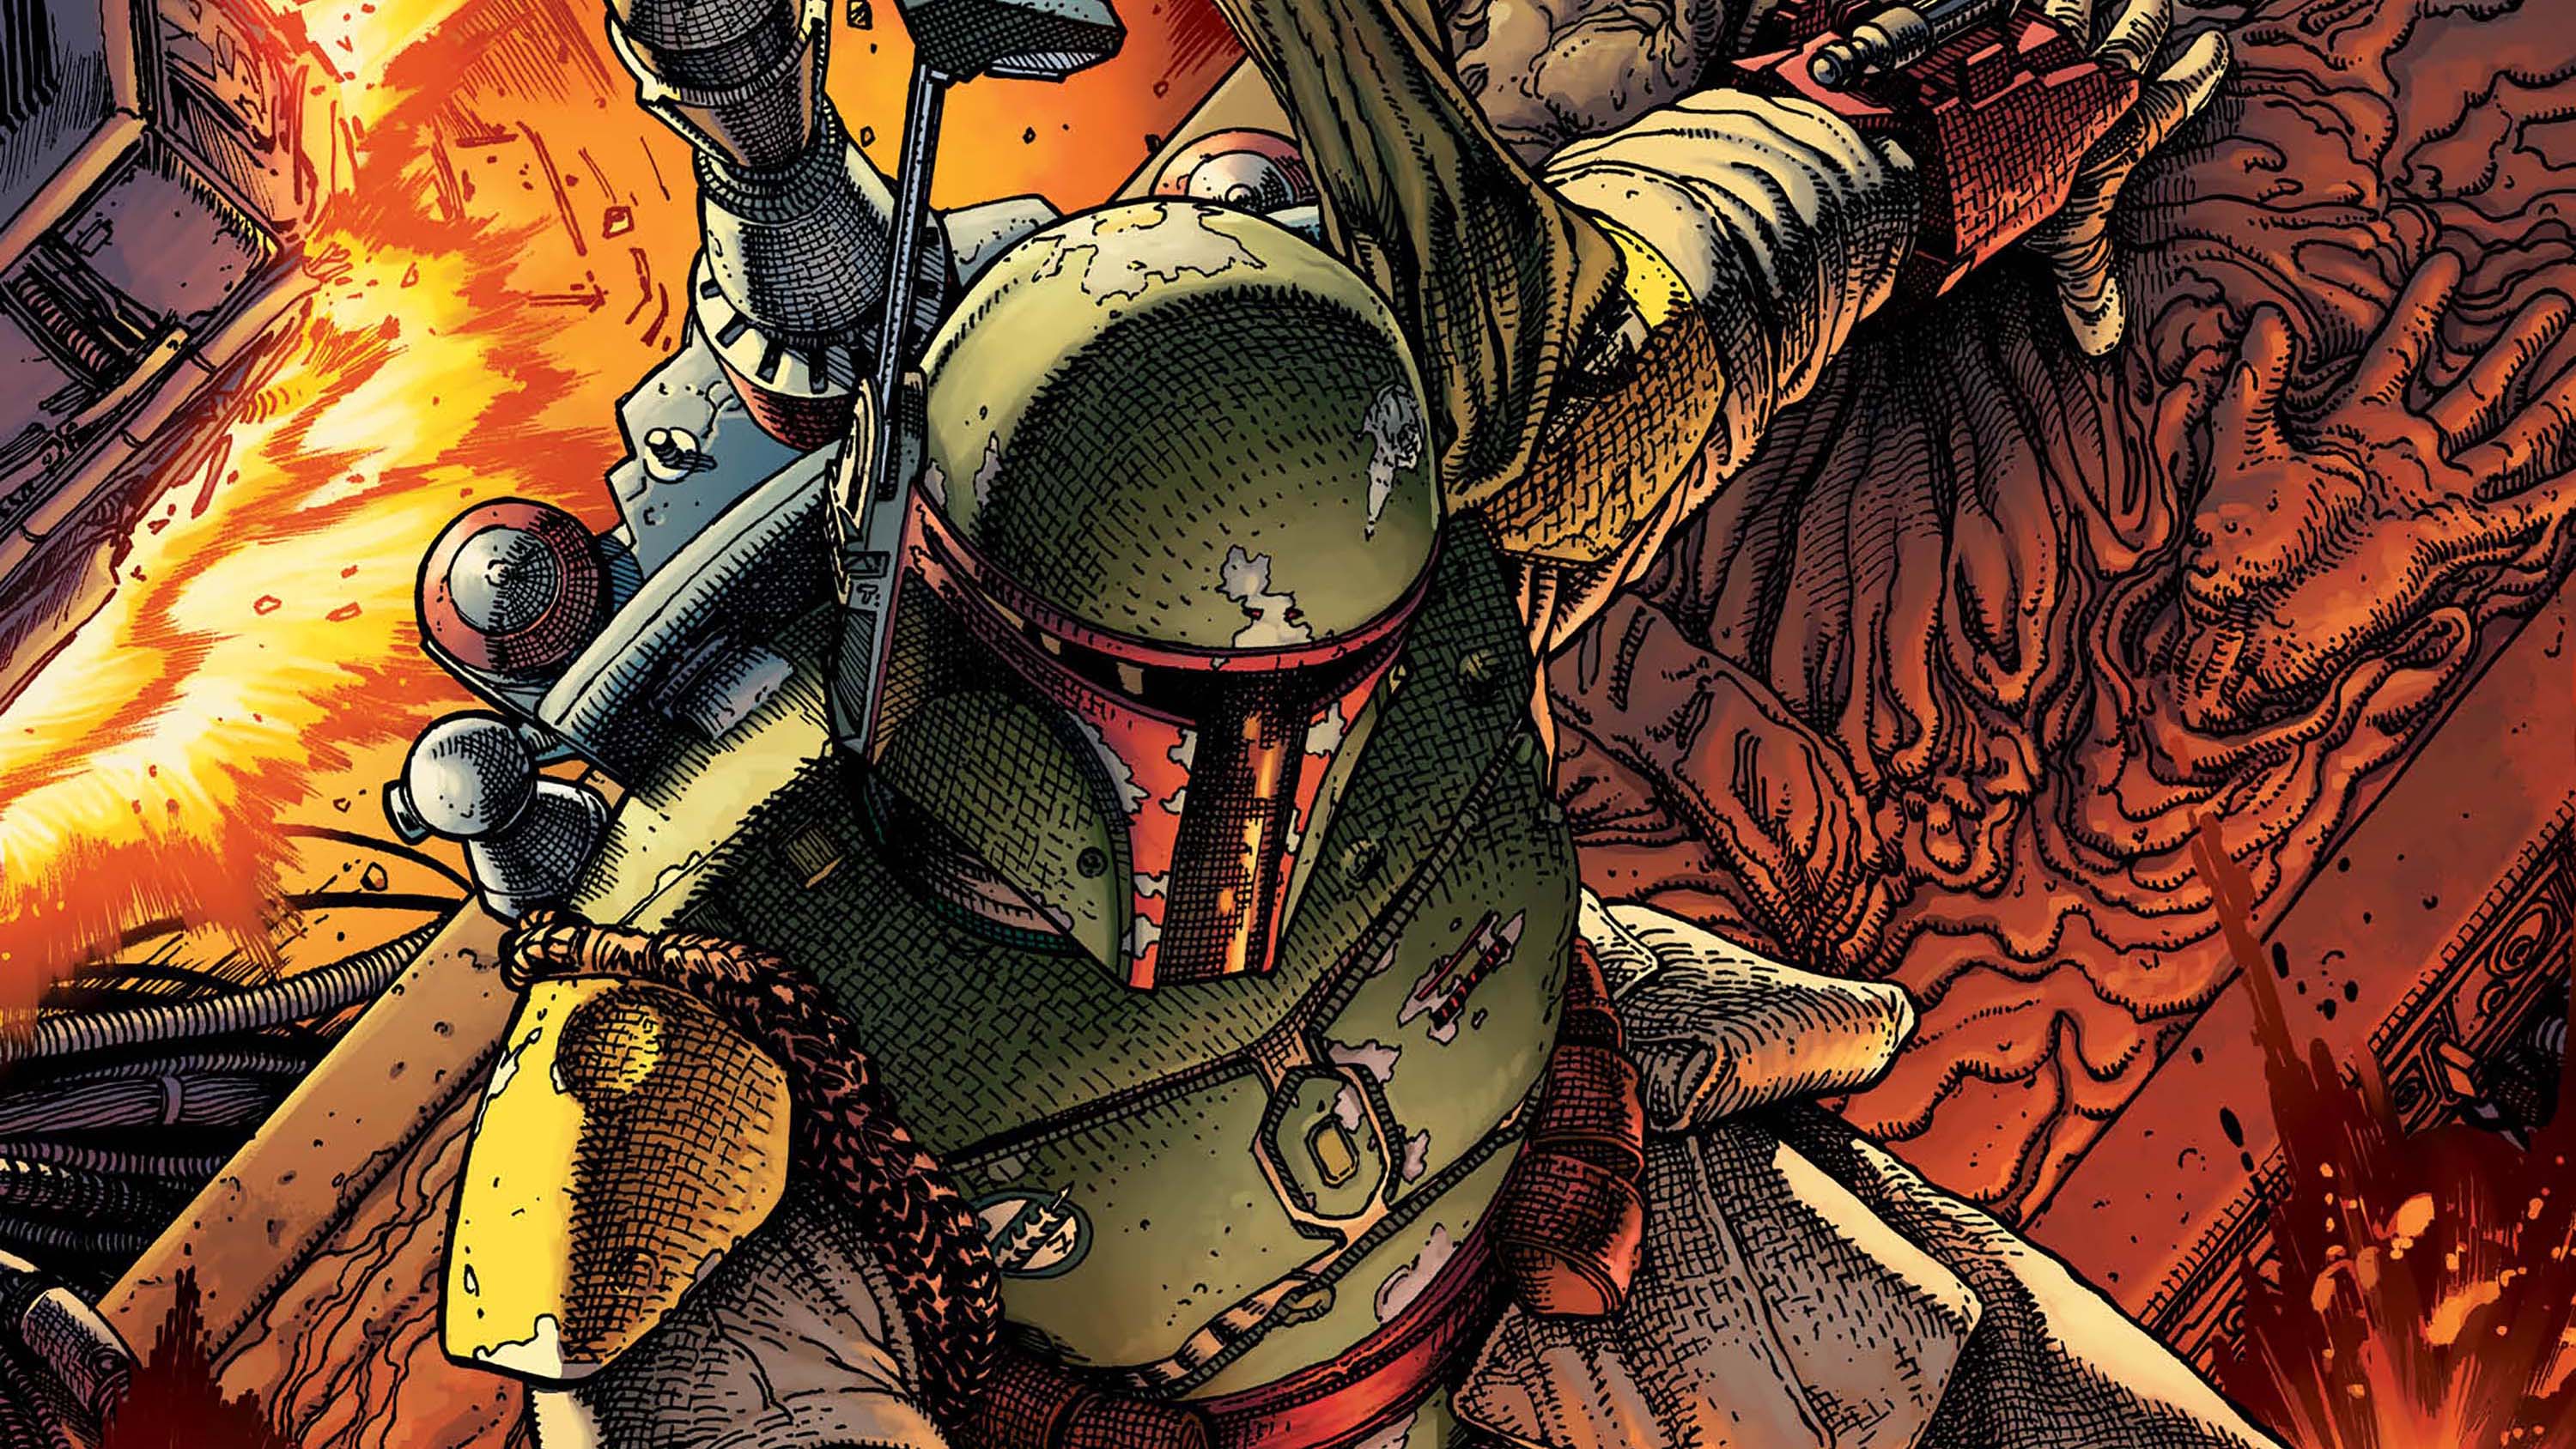 Boba Fett Takes On The Galaxy In Marvel Comics Bold New Star Wars War Of The Bounty Hunters